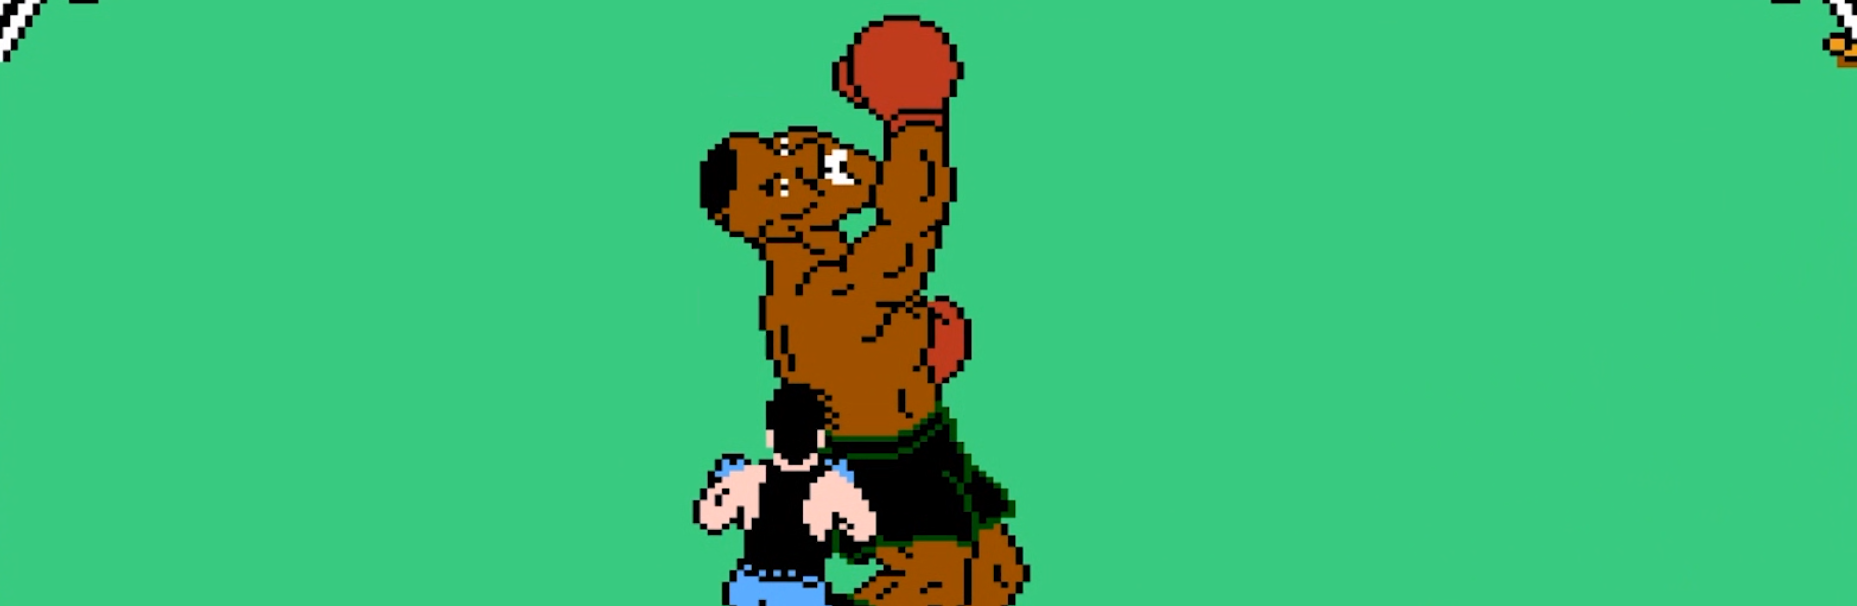 Mike Tyson – Mike Tyson’s Punch-Out!! NES